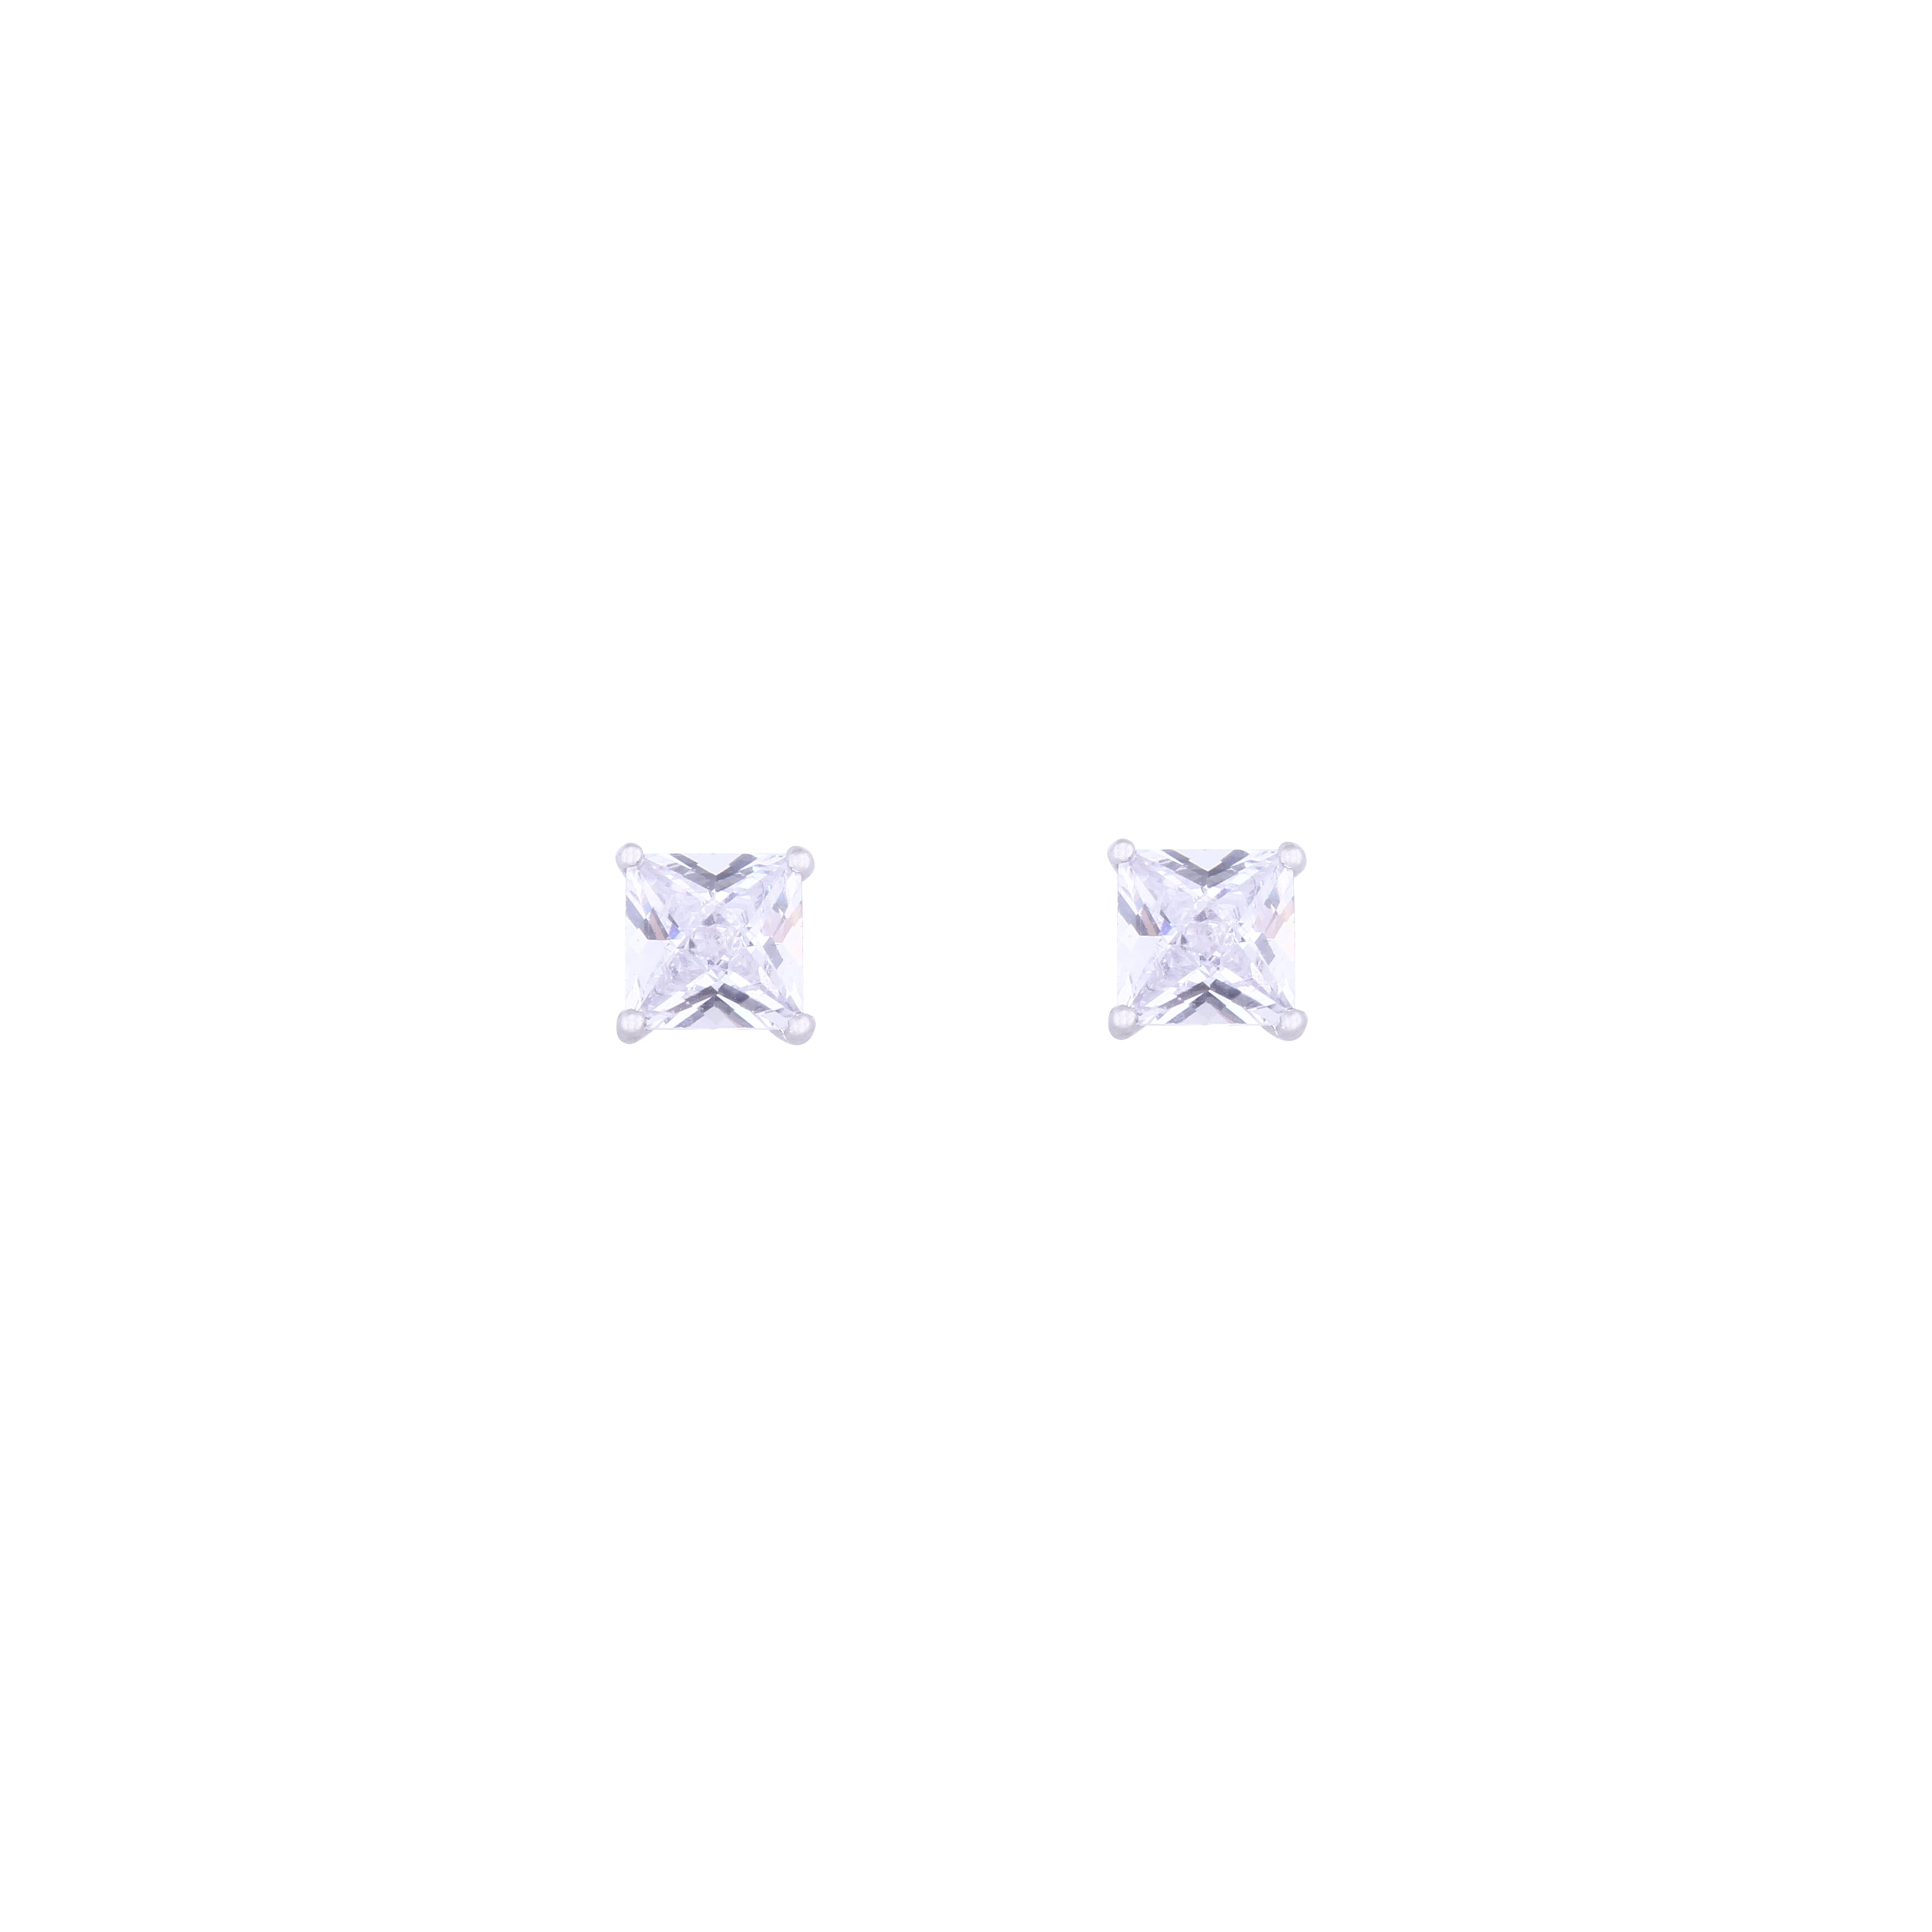 Asfour Crystal 925 Sterling Silver Stud Earring With Square Design